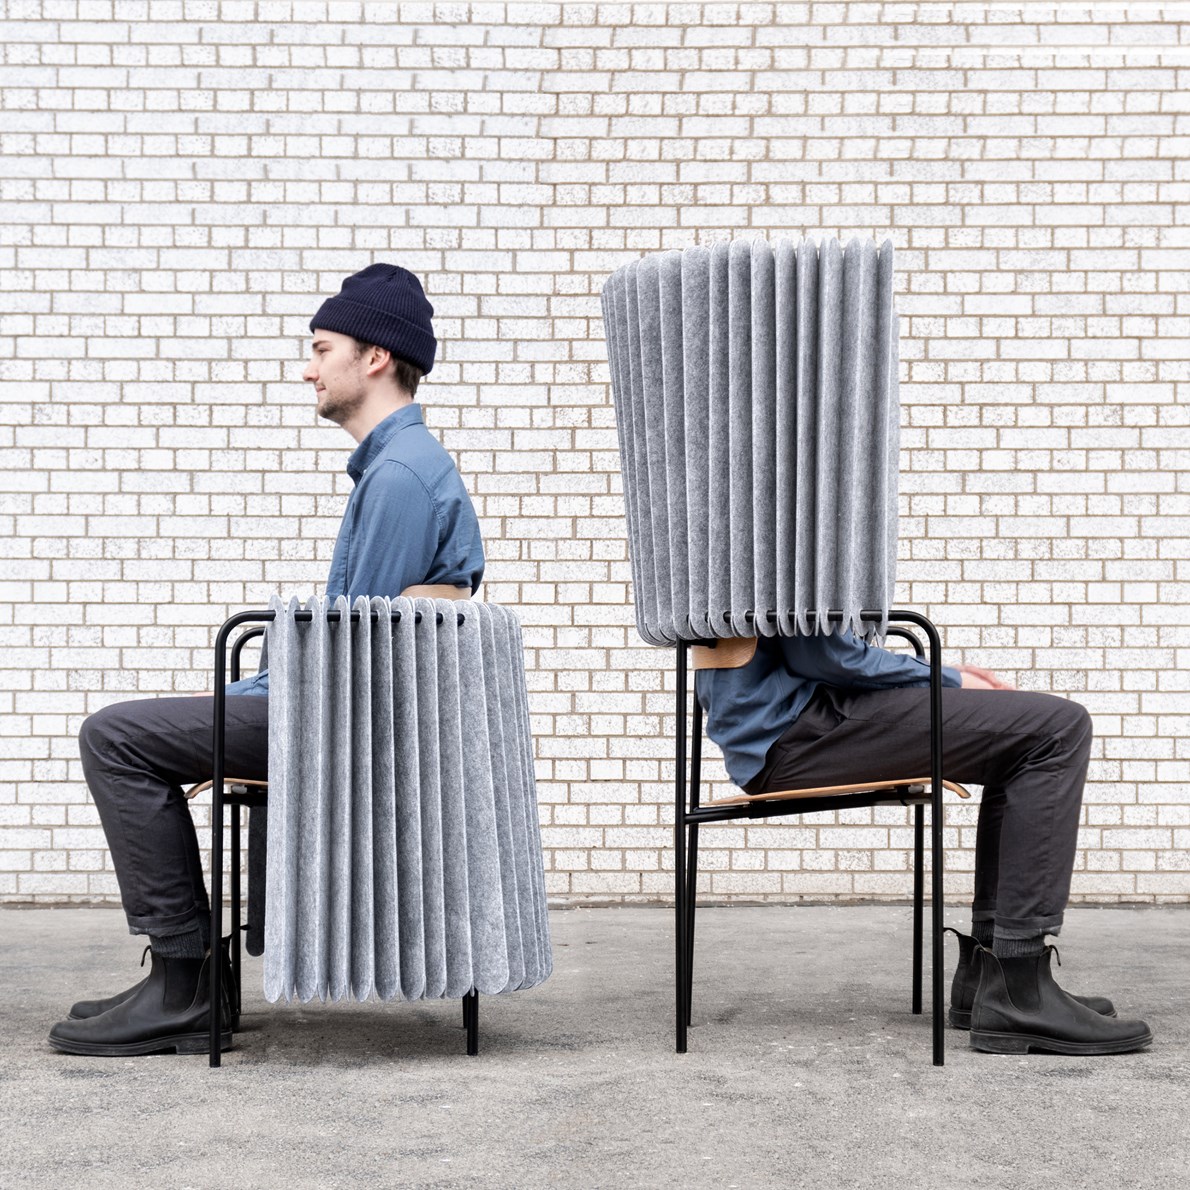 Peacock Chair: A Design Solution for the New Normal of Working from Home